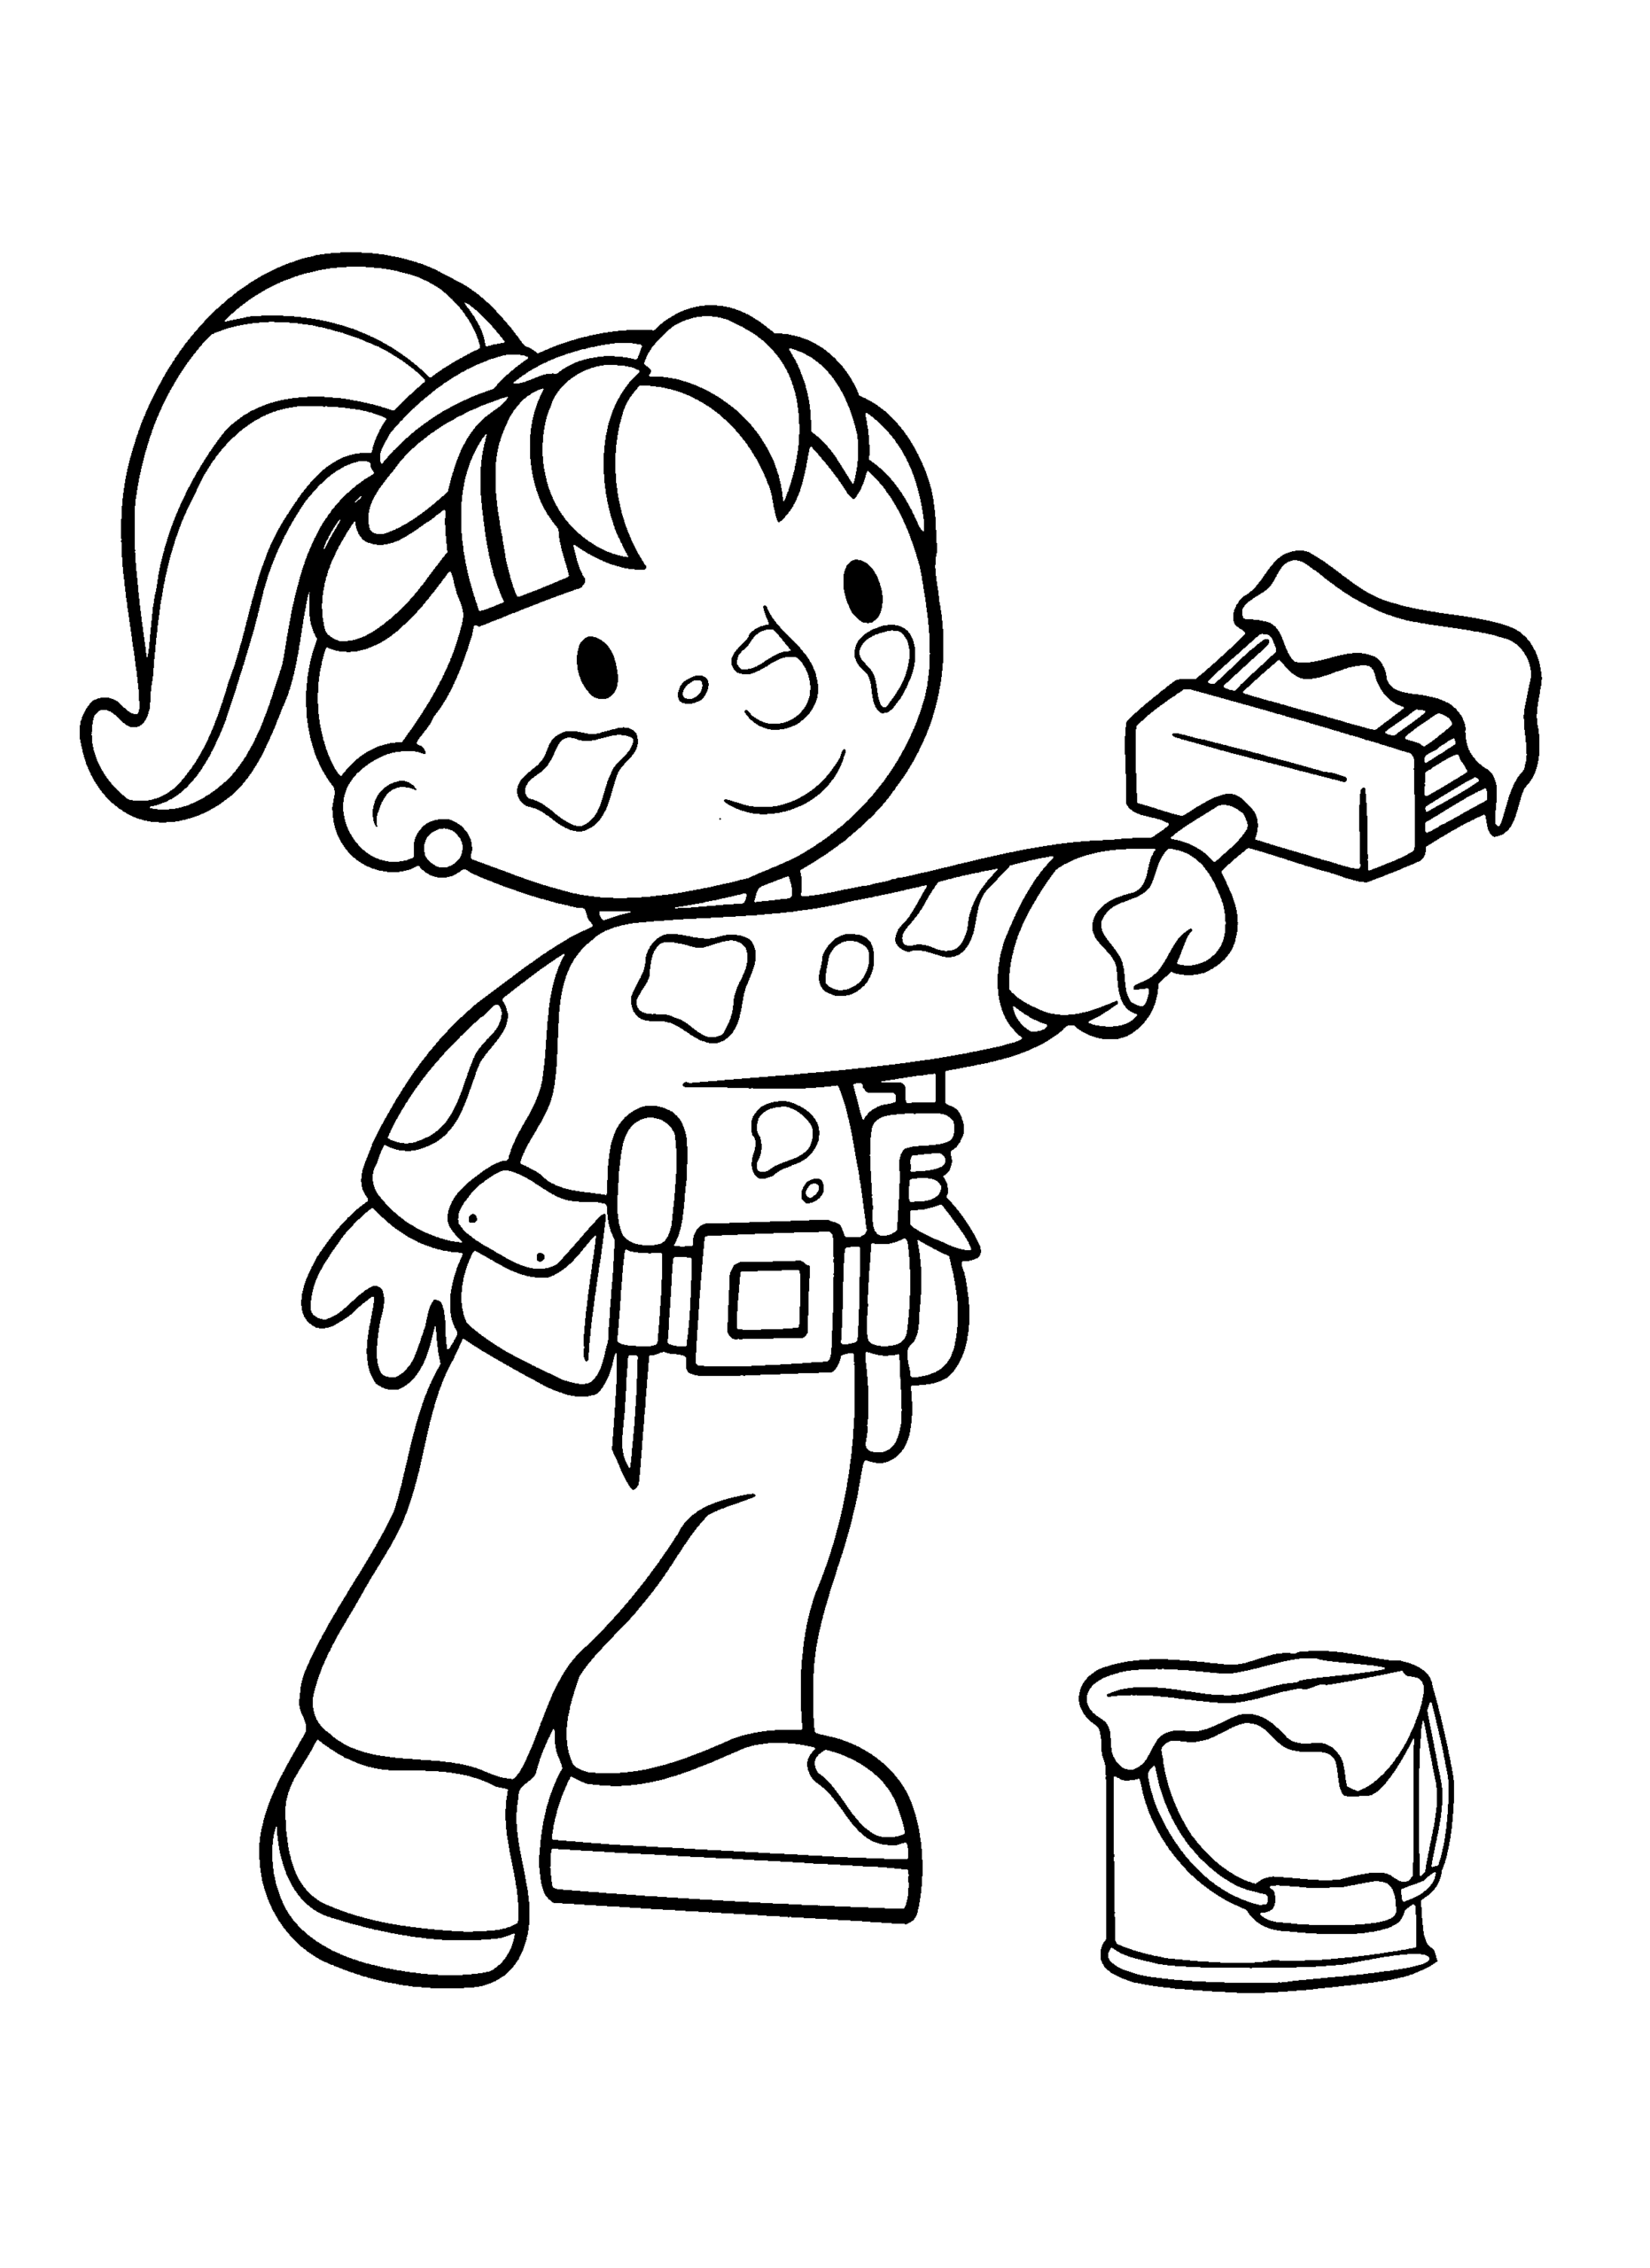 Bob the Builder Coloring Pages TV Film bob the builder 6 Printable 2020 01080 Coloring4free